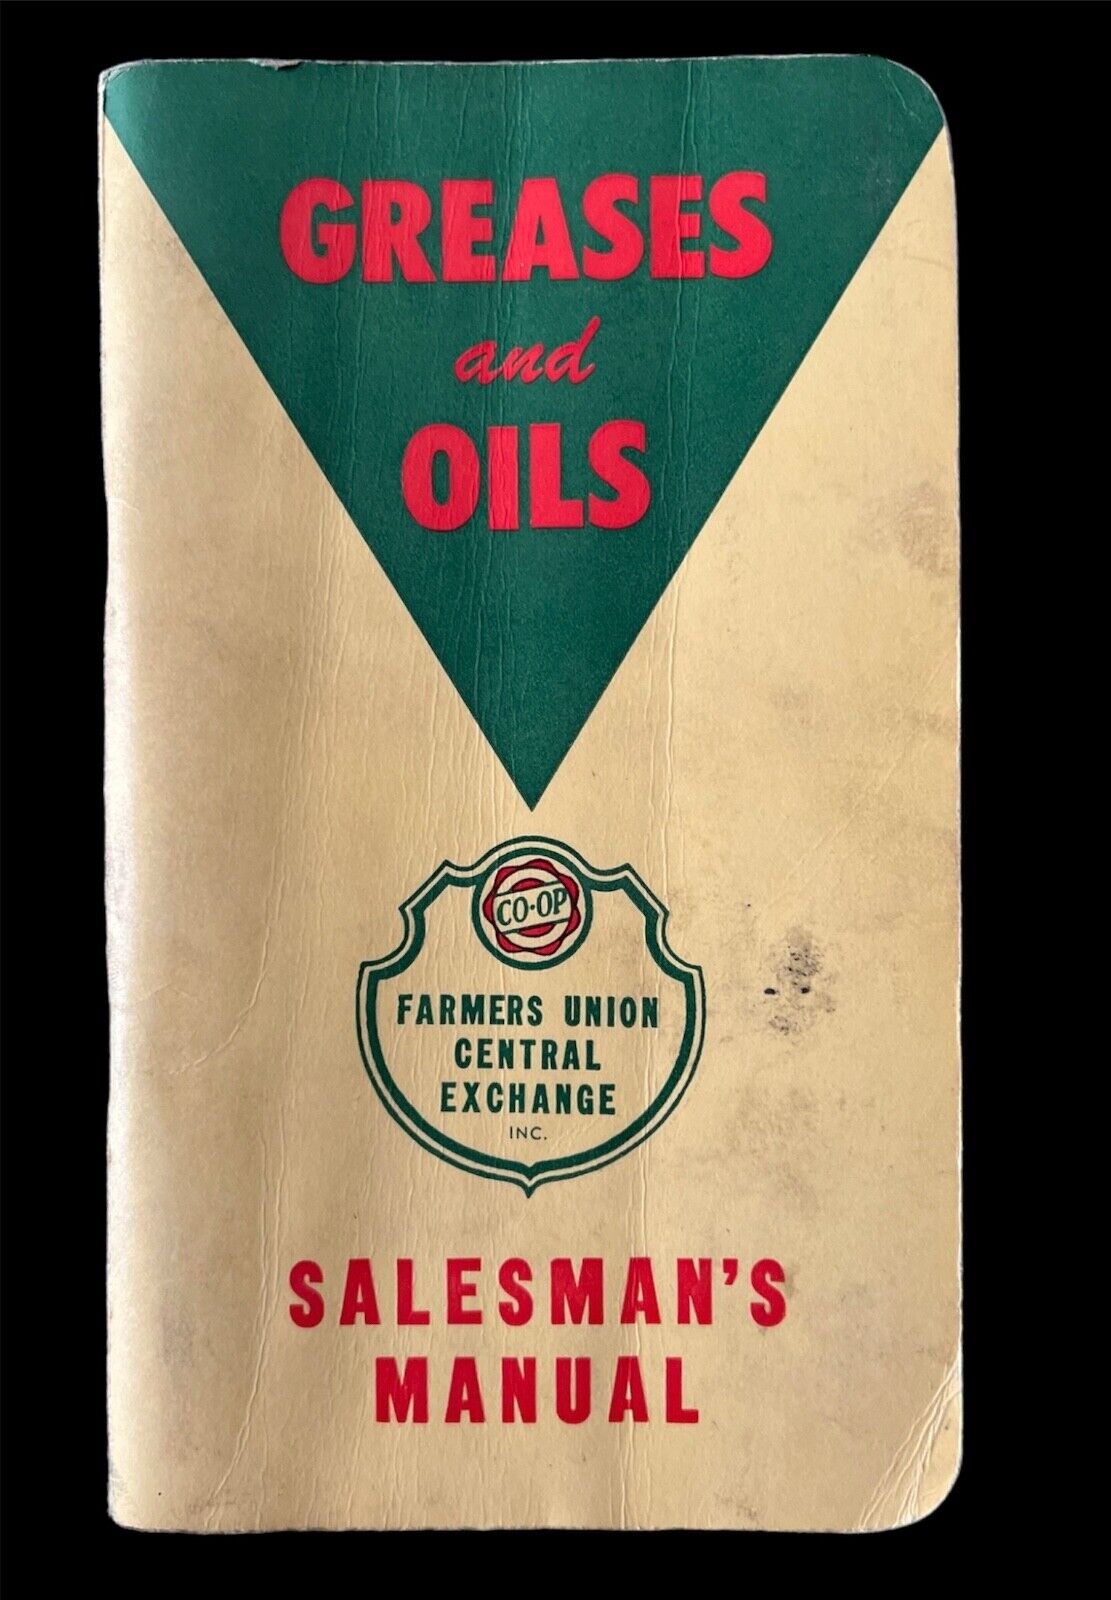 Farmers Union Co-op Greases and Oils Salesman's Manual Vintage